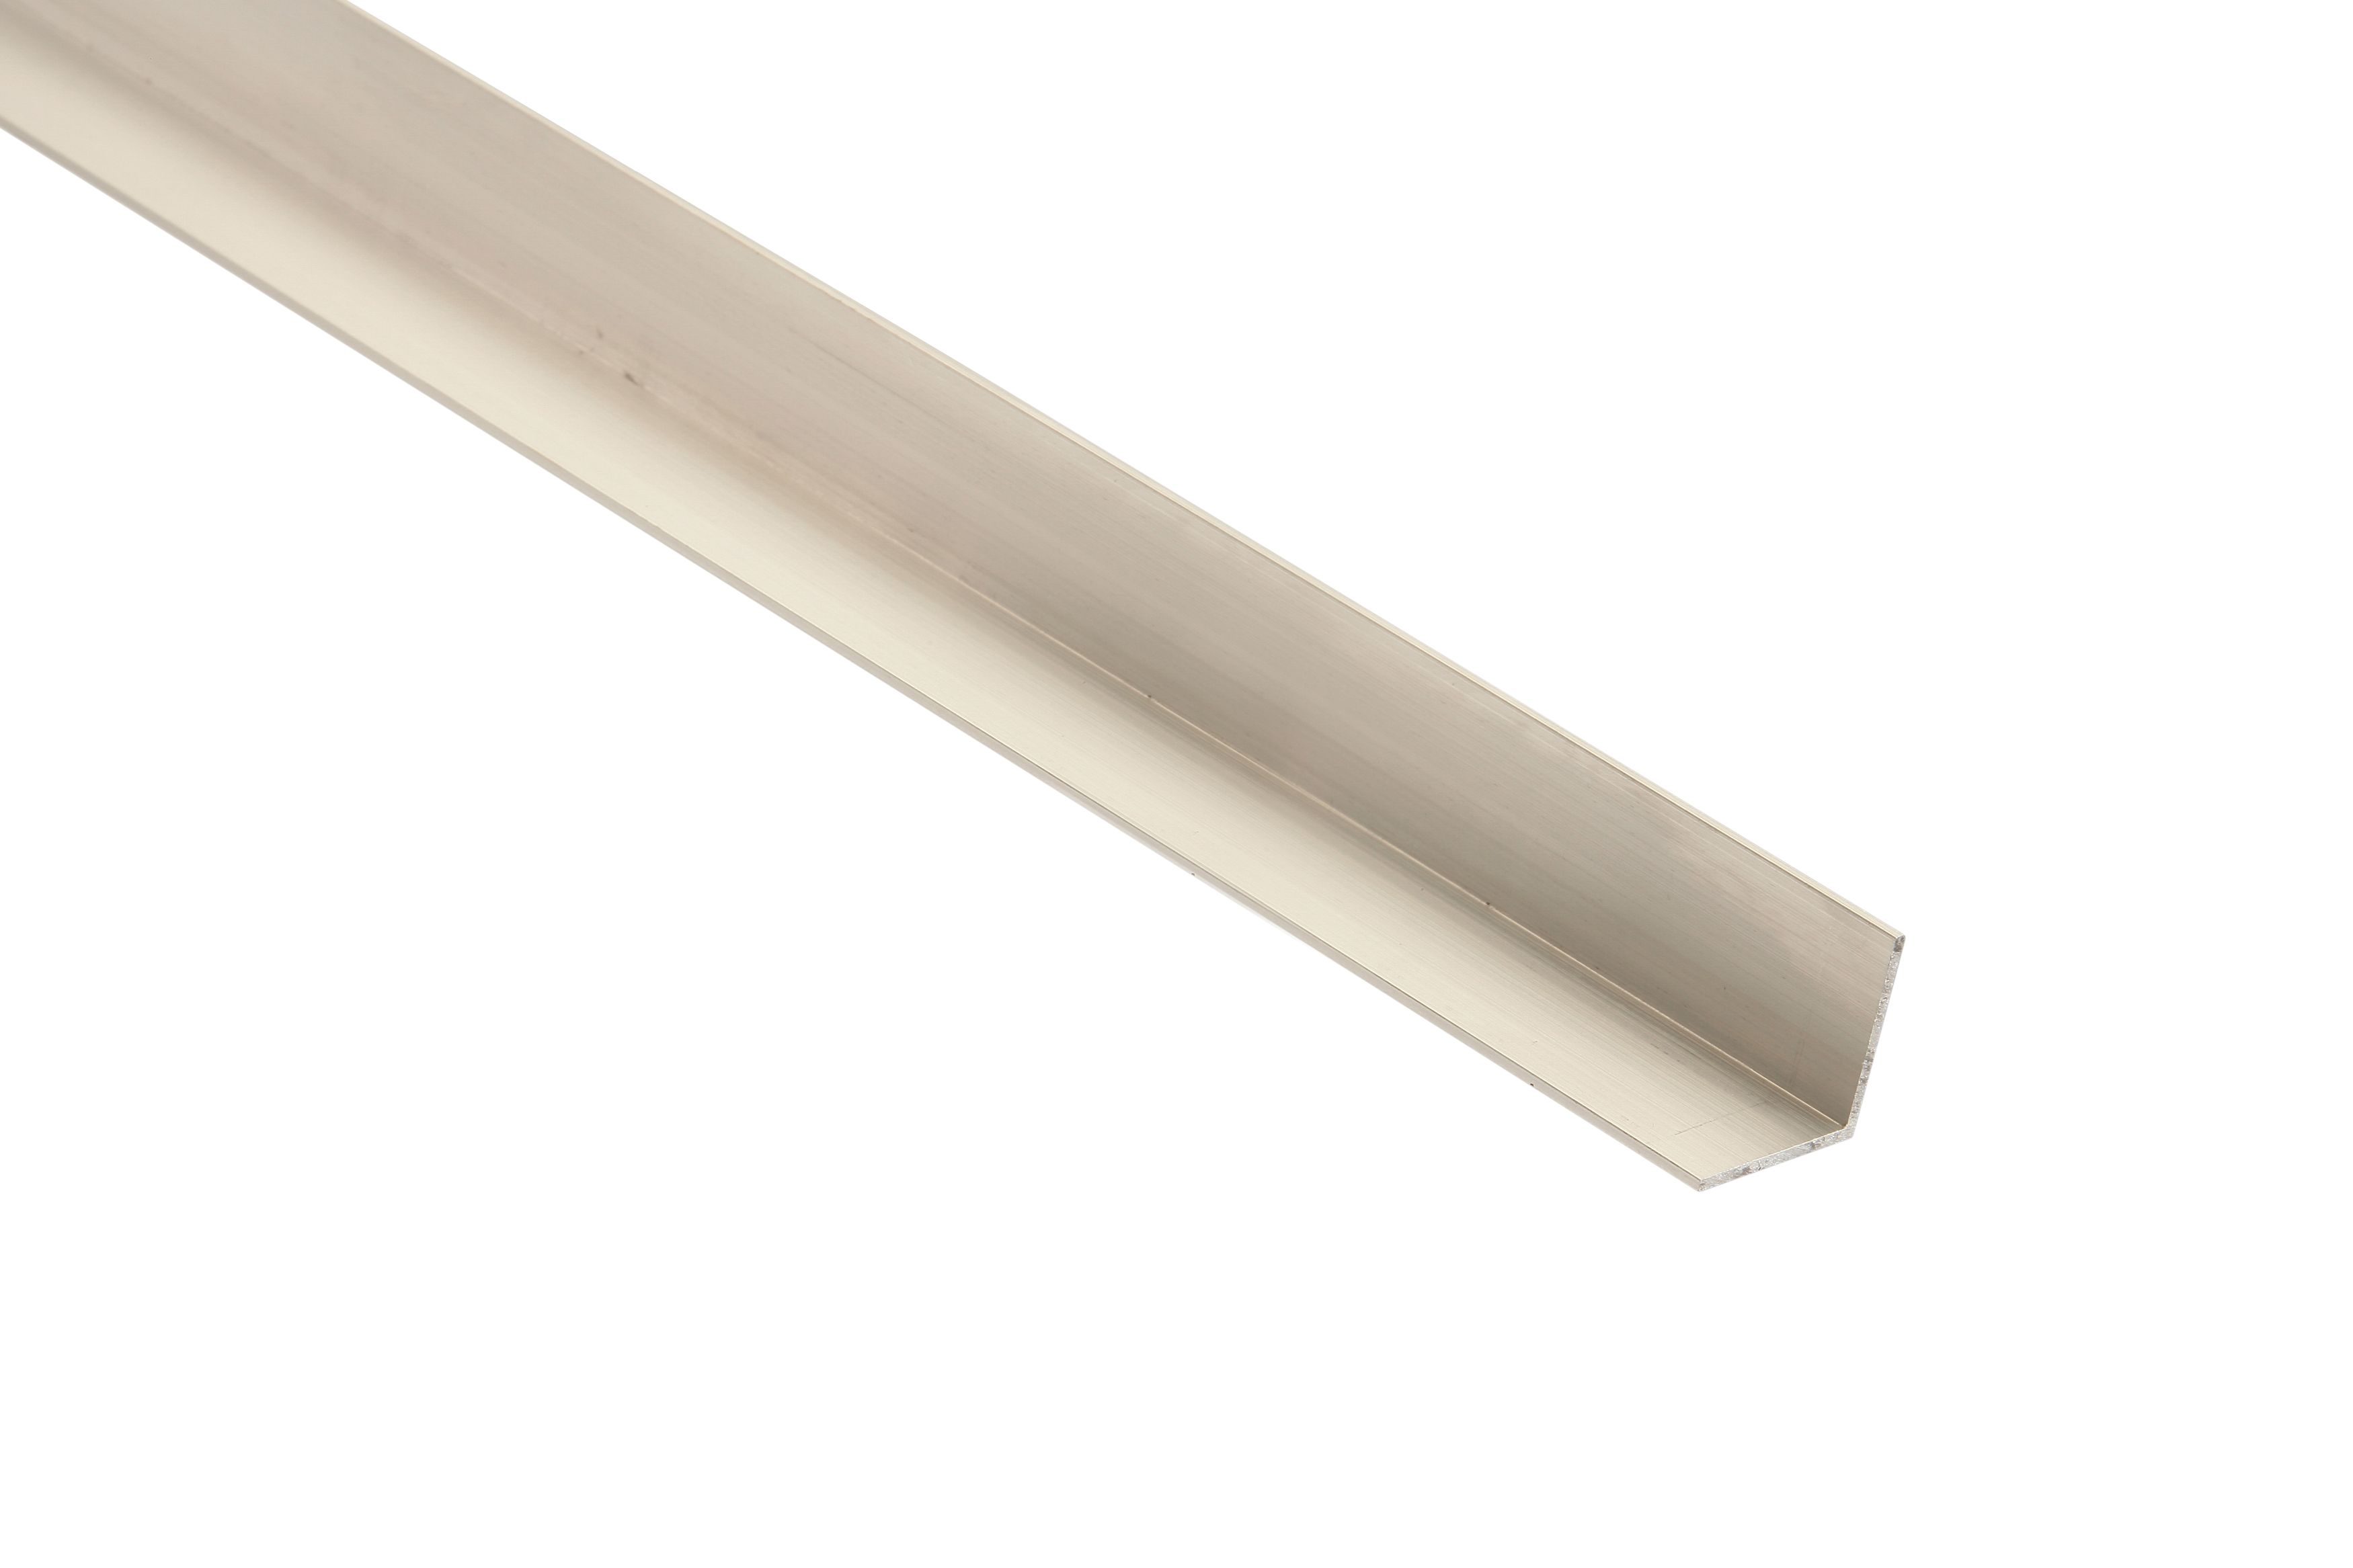 Image of Wickes Aluminium Angle Moulding - 25 x 25 x 2400mm